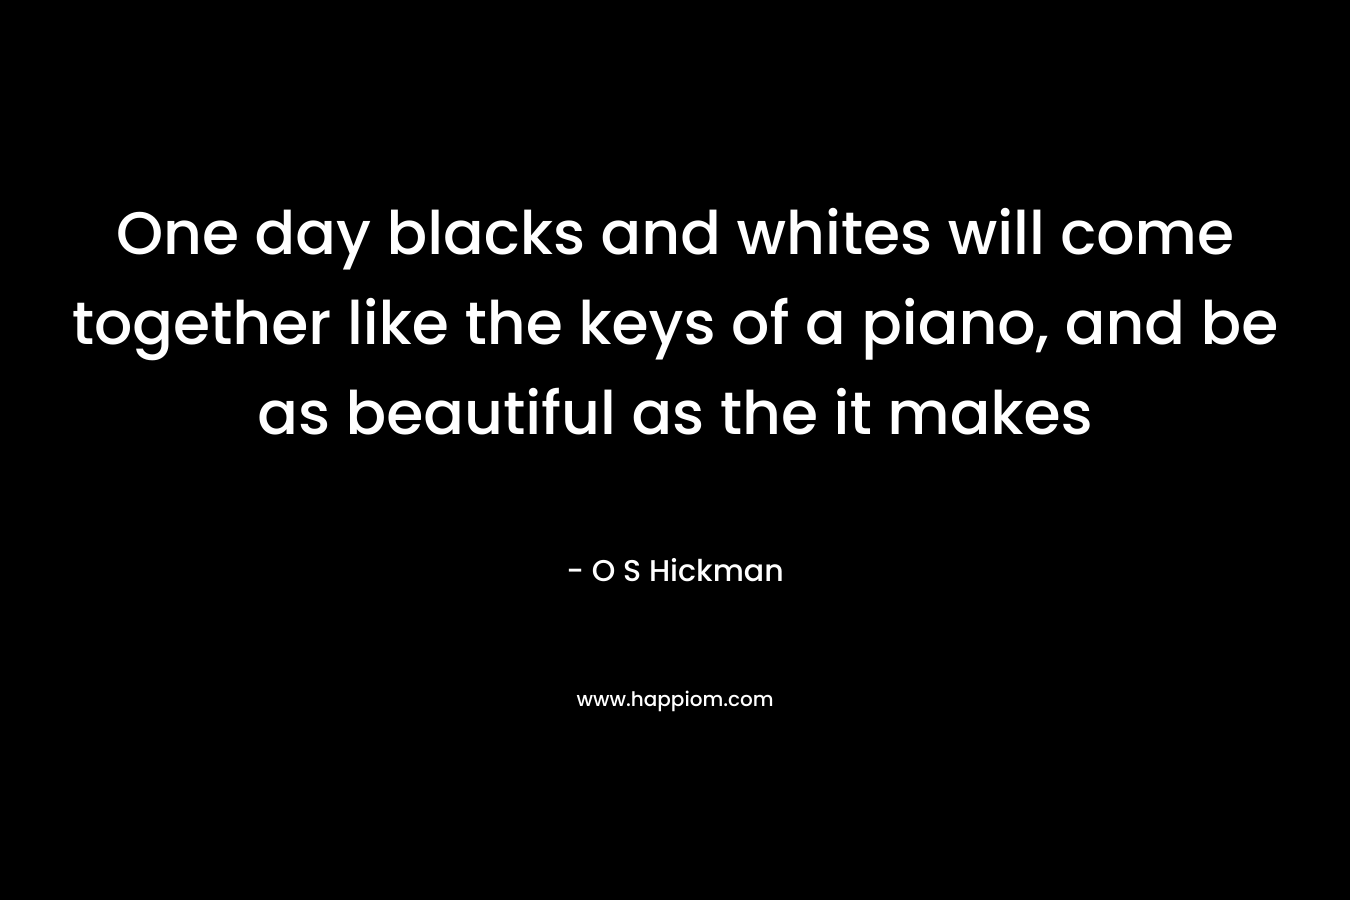 One day blacks and whites will come together like the keys of a piano, and be as beautiful as the it makes – O S Hickman